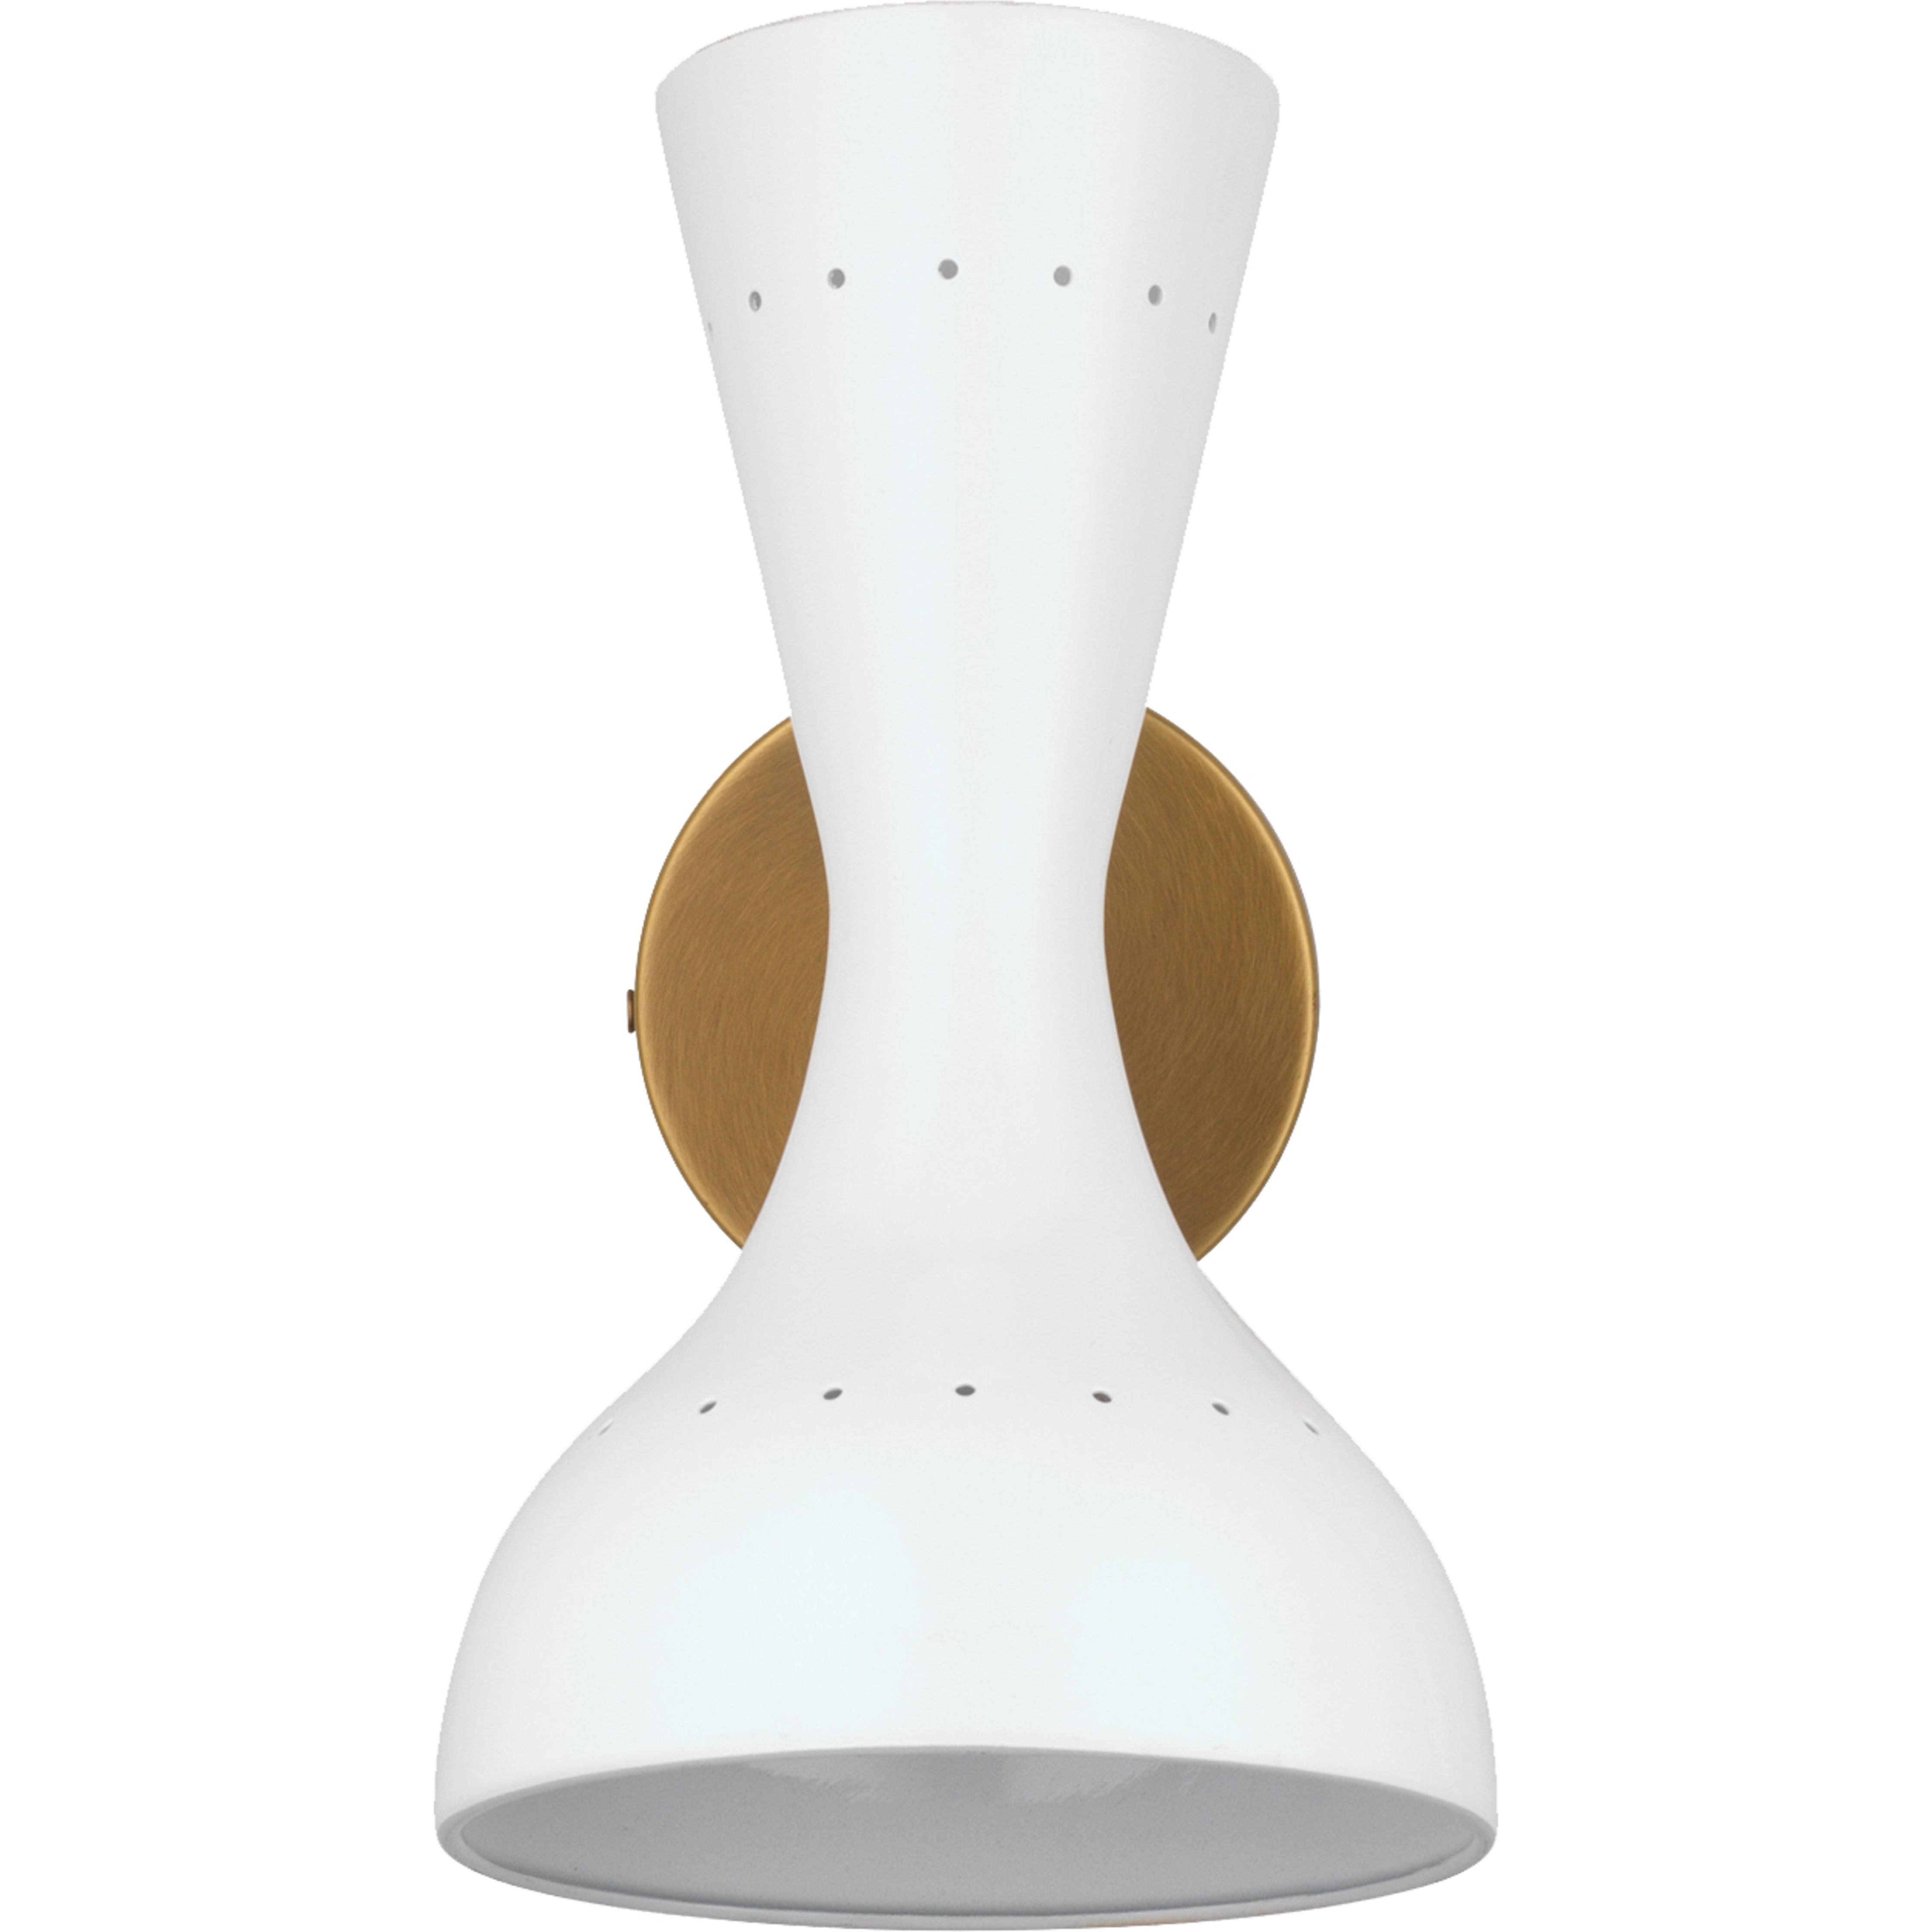 Jamie Young Company - 4PISA-SCWH - Pisa Wall Sconce - Pisa - White